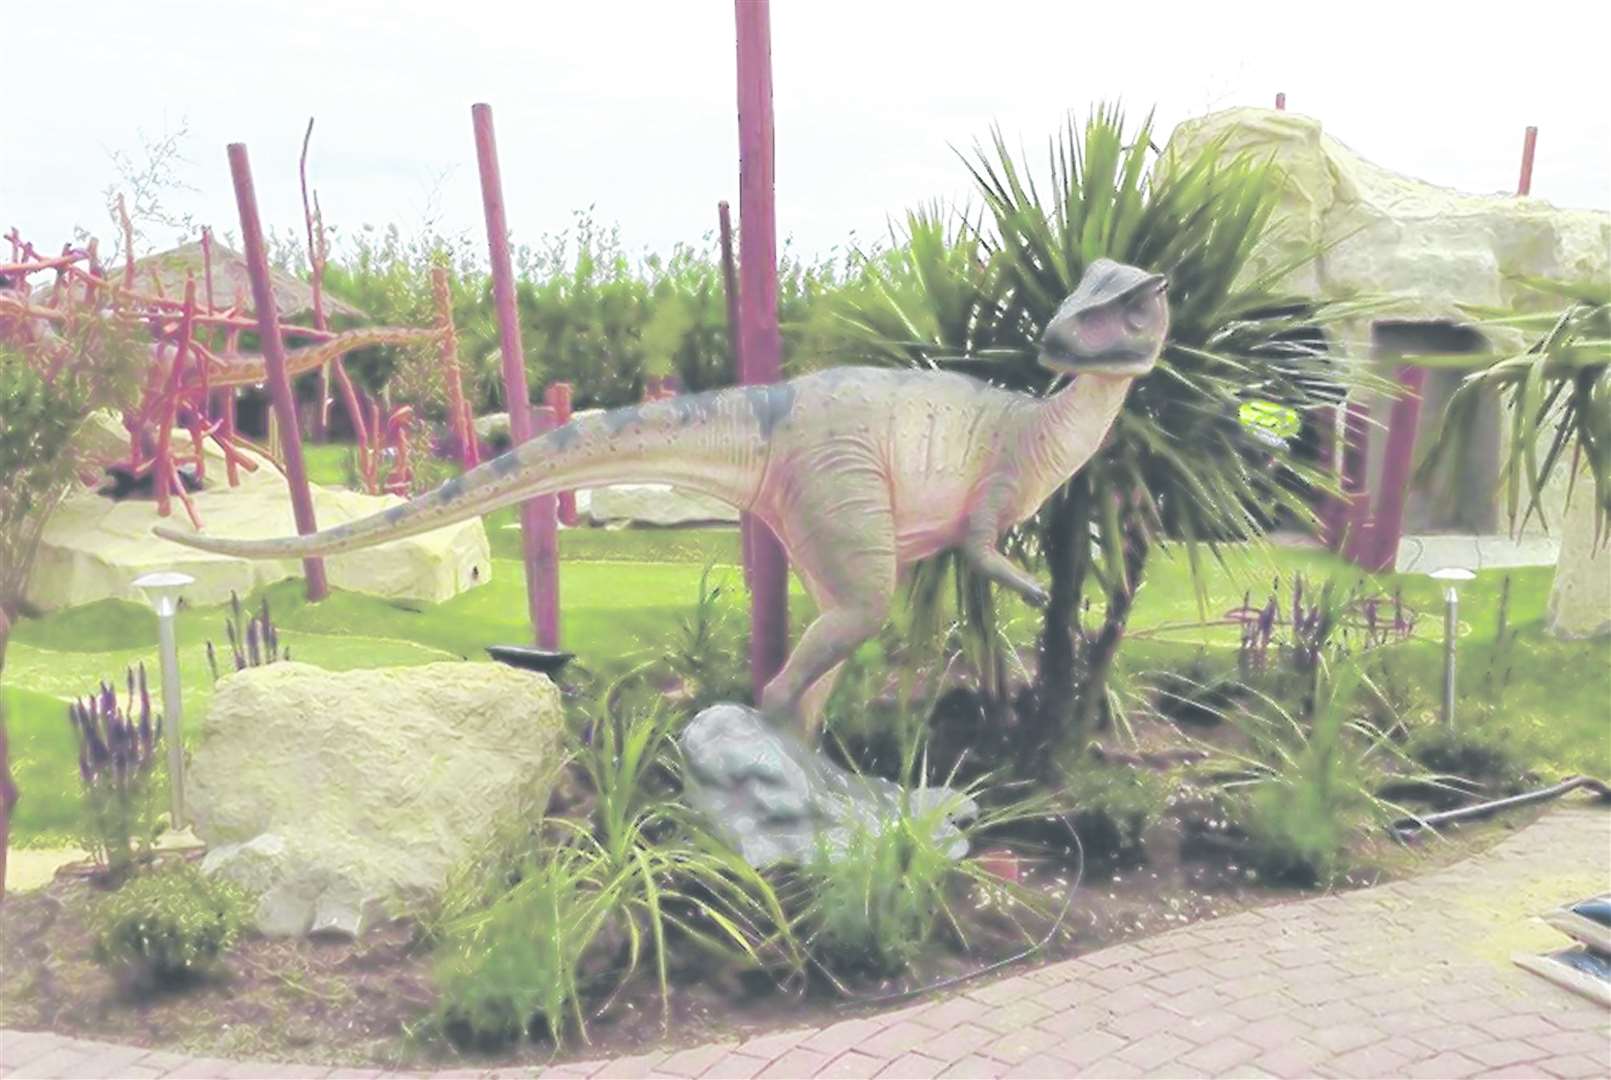 The owners of Rascal Bay at Manston are involved in plans to create a crazy golf centre at Walmer Putting Green beside the paddling pool